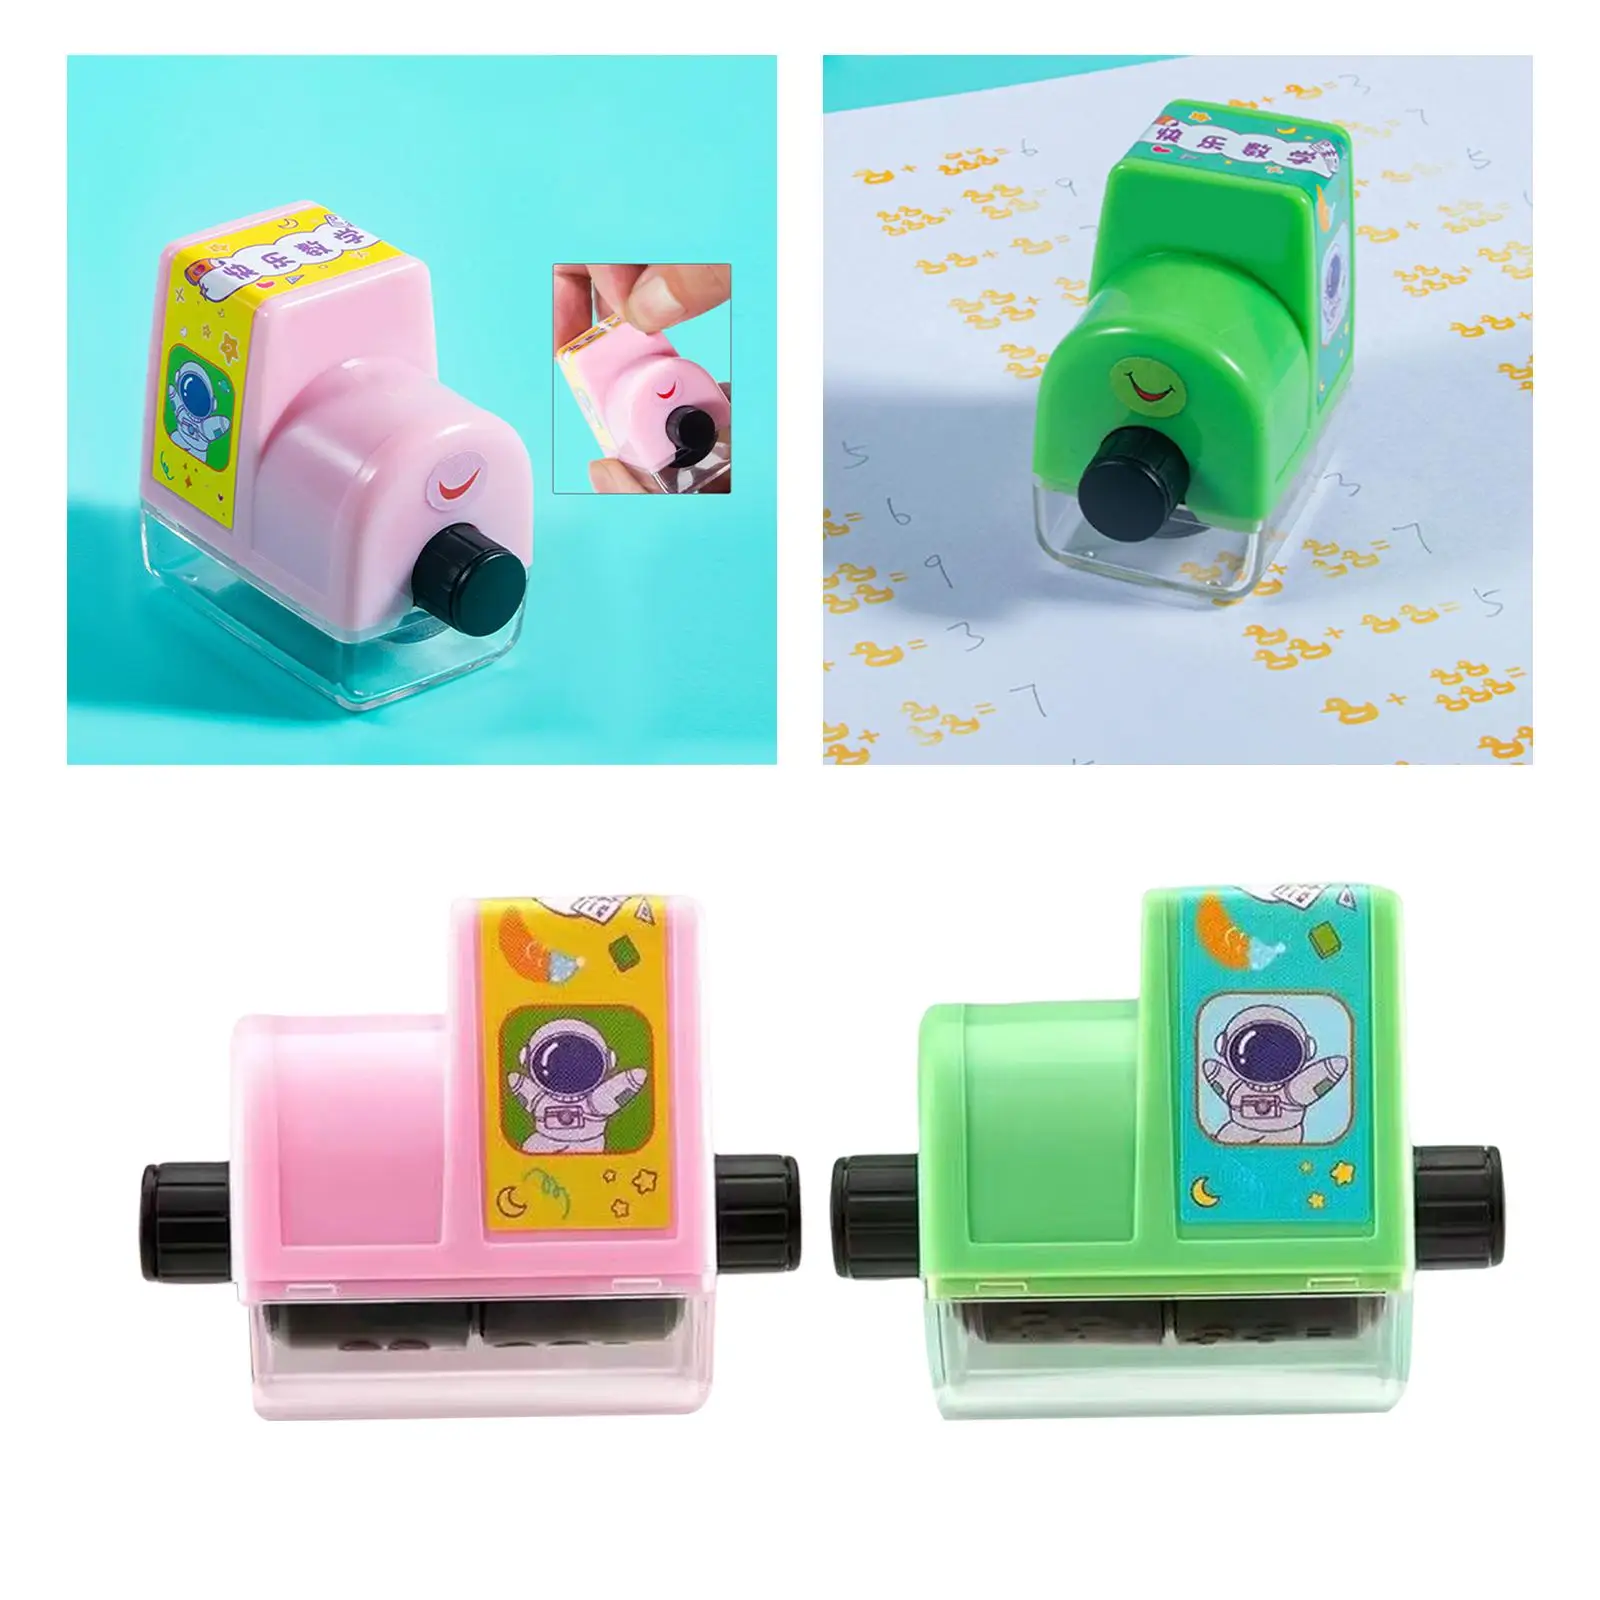 Reusable Math Learning Stamps Math Trainer Roller Stamp Learning Educational Toy Mathematics Learning Aids for Preschool Kids